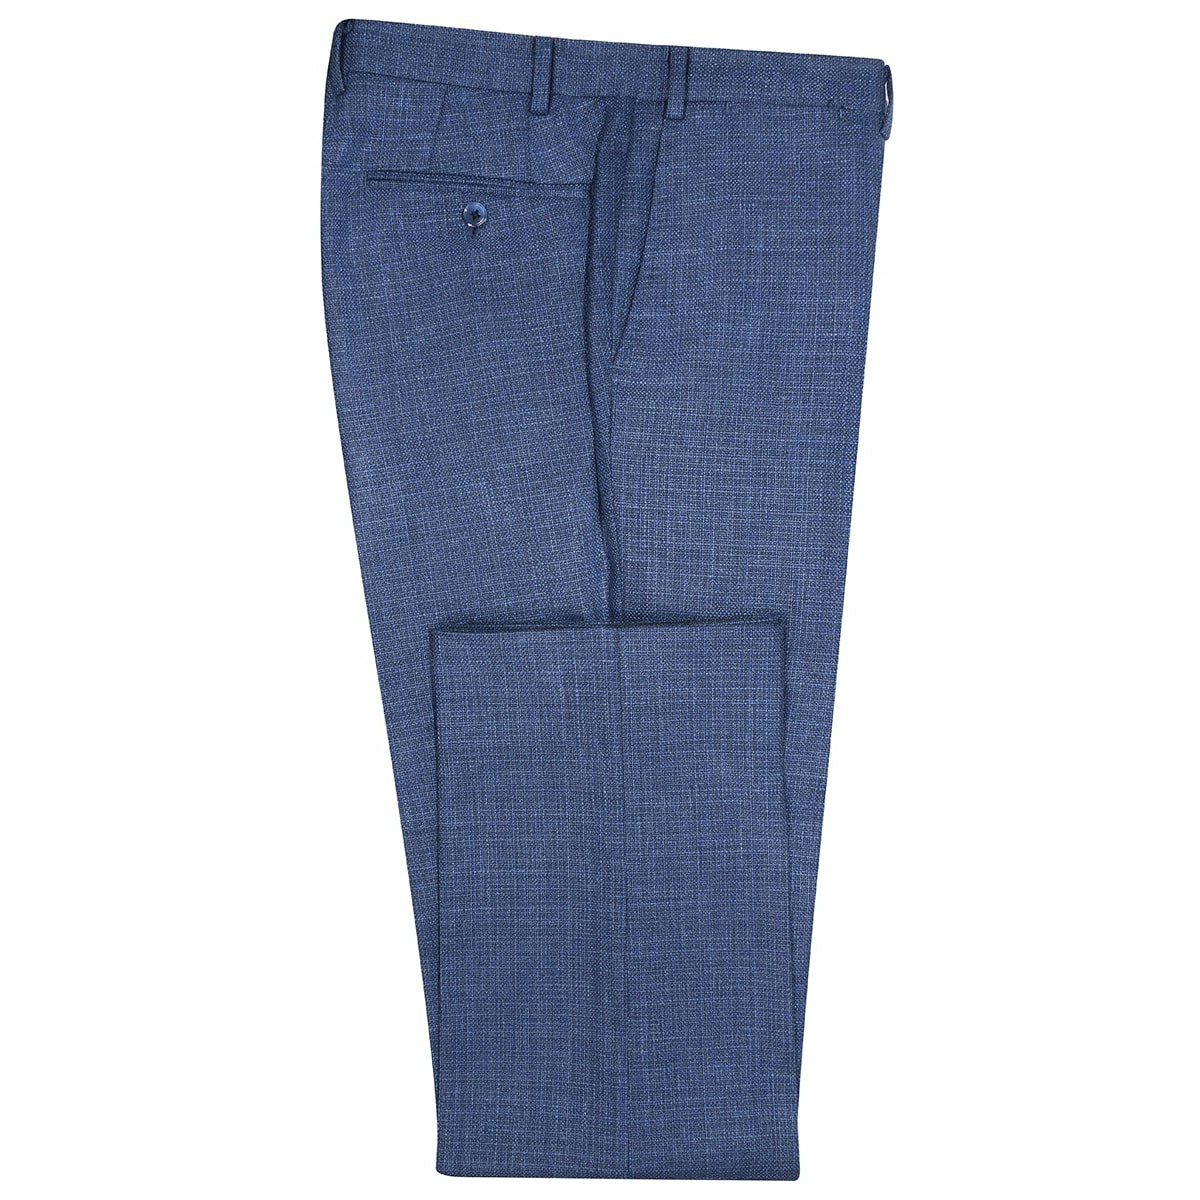 InStitchu Collection The Rocklyn Deep Sea Blue Twill Wool Pants